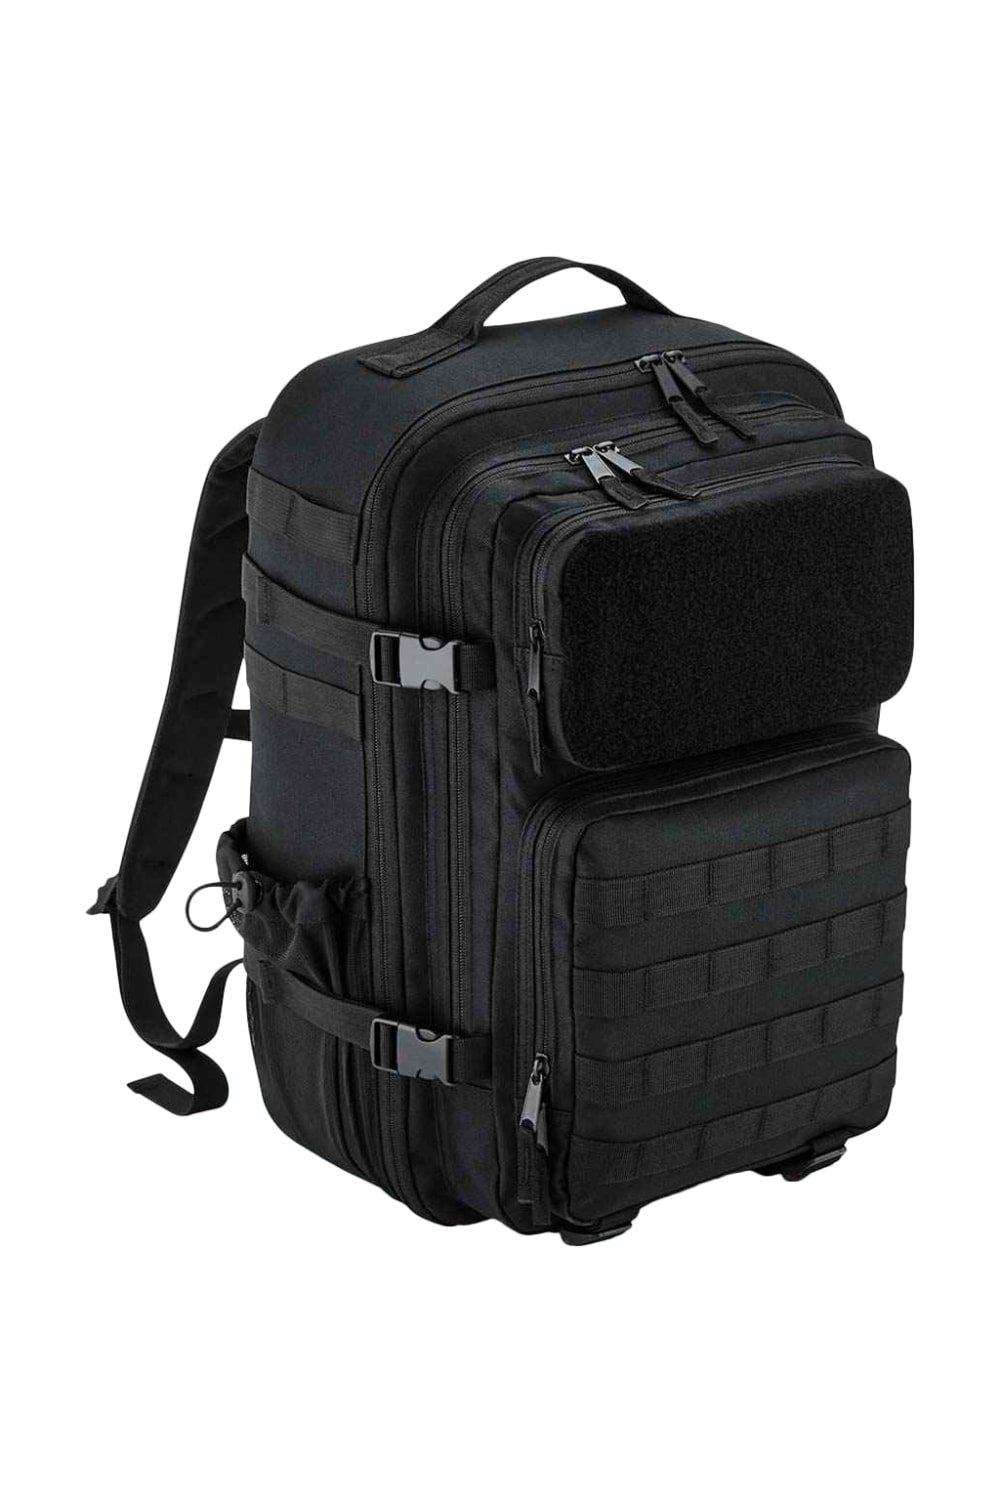 Molle Tactical 35L Backpack